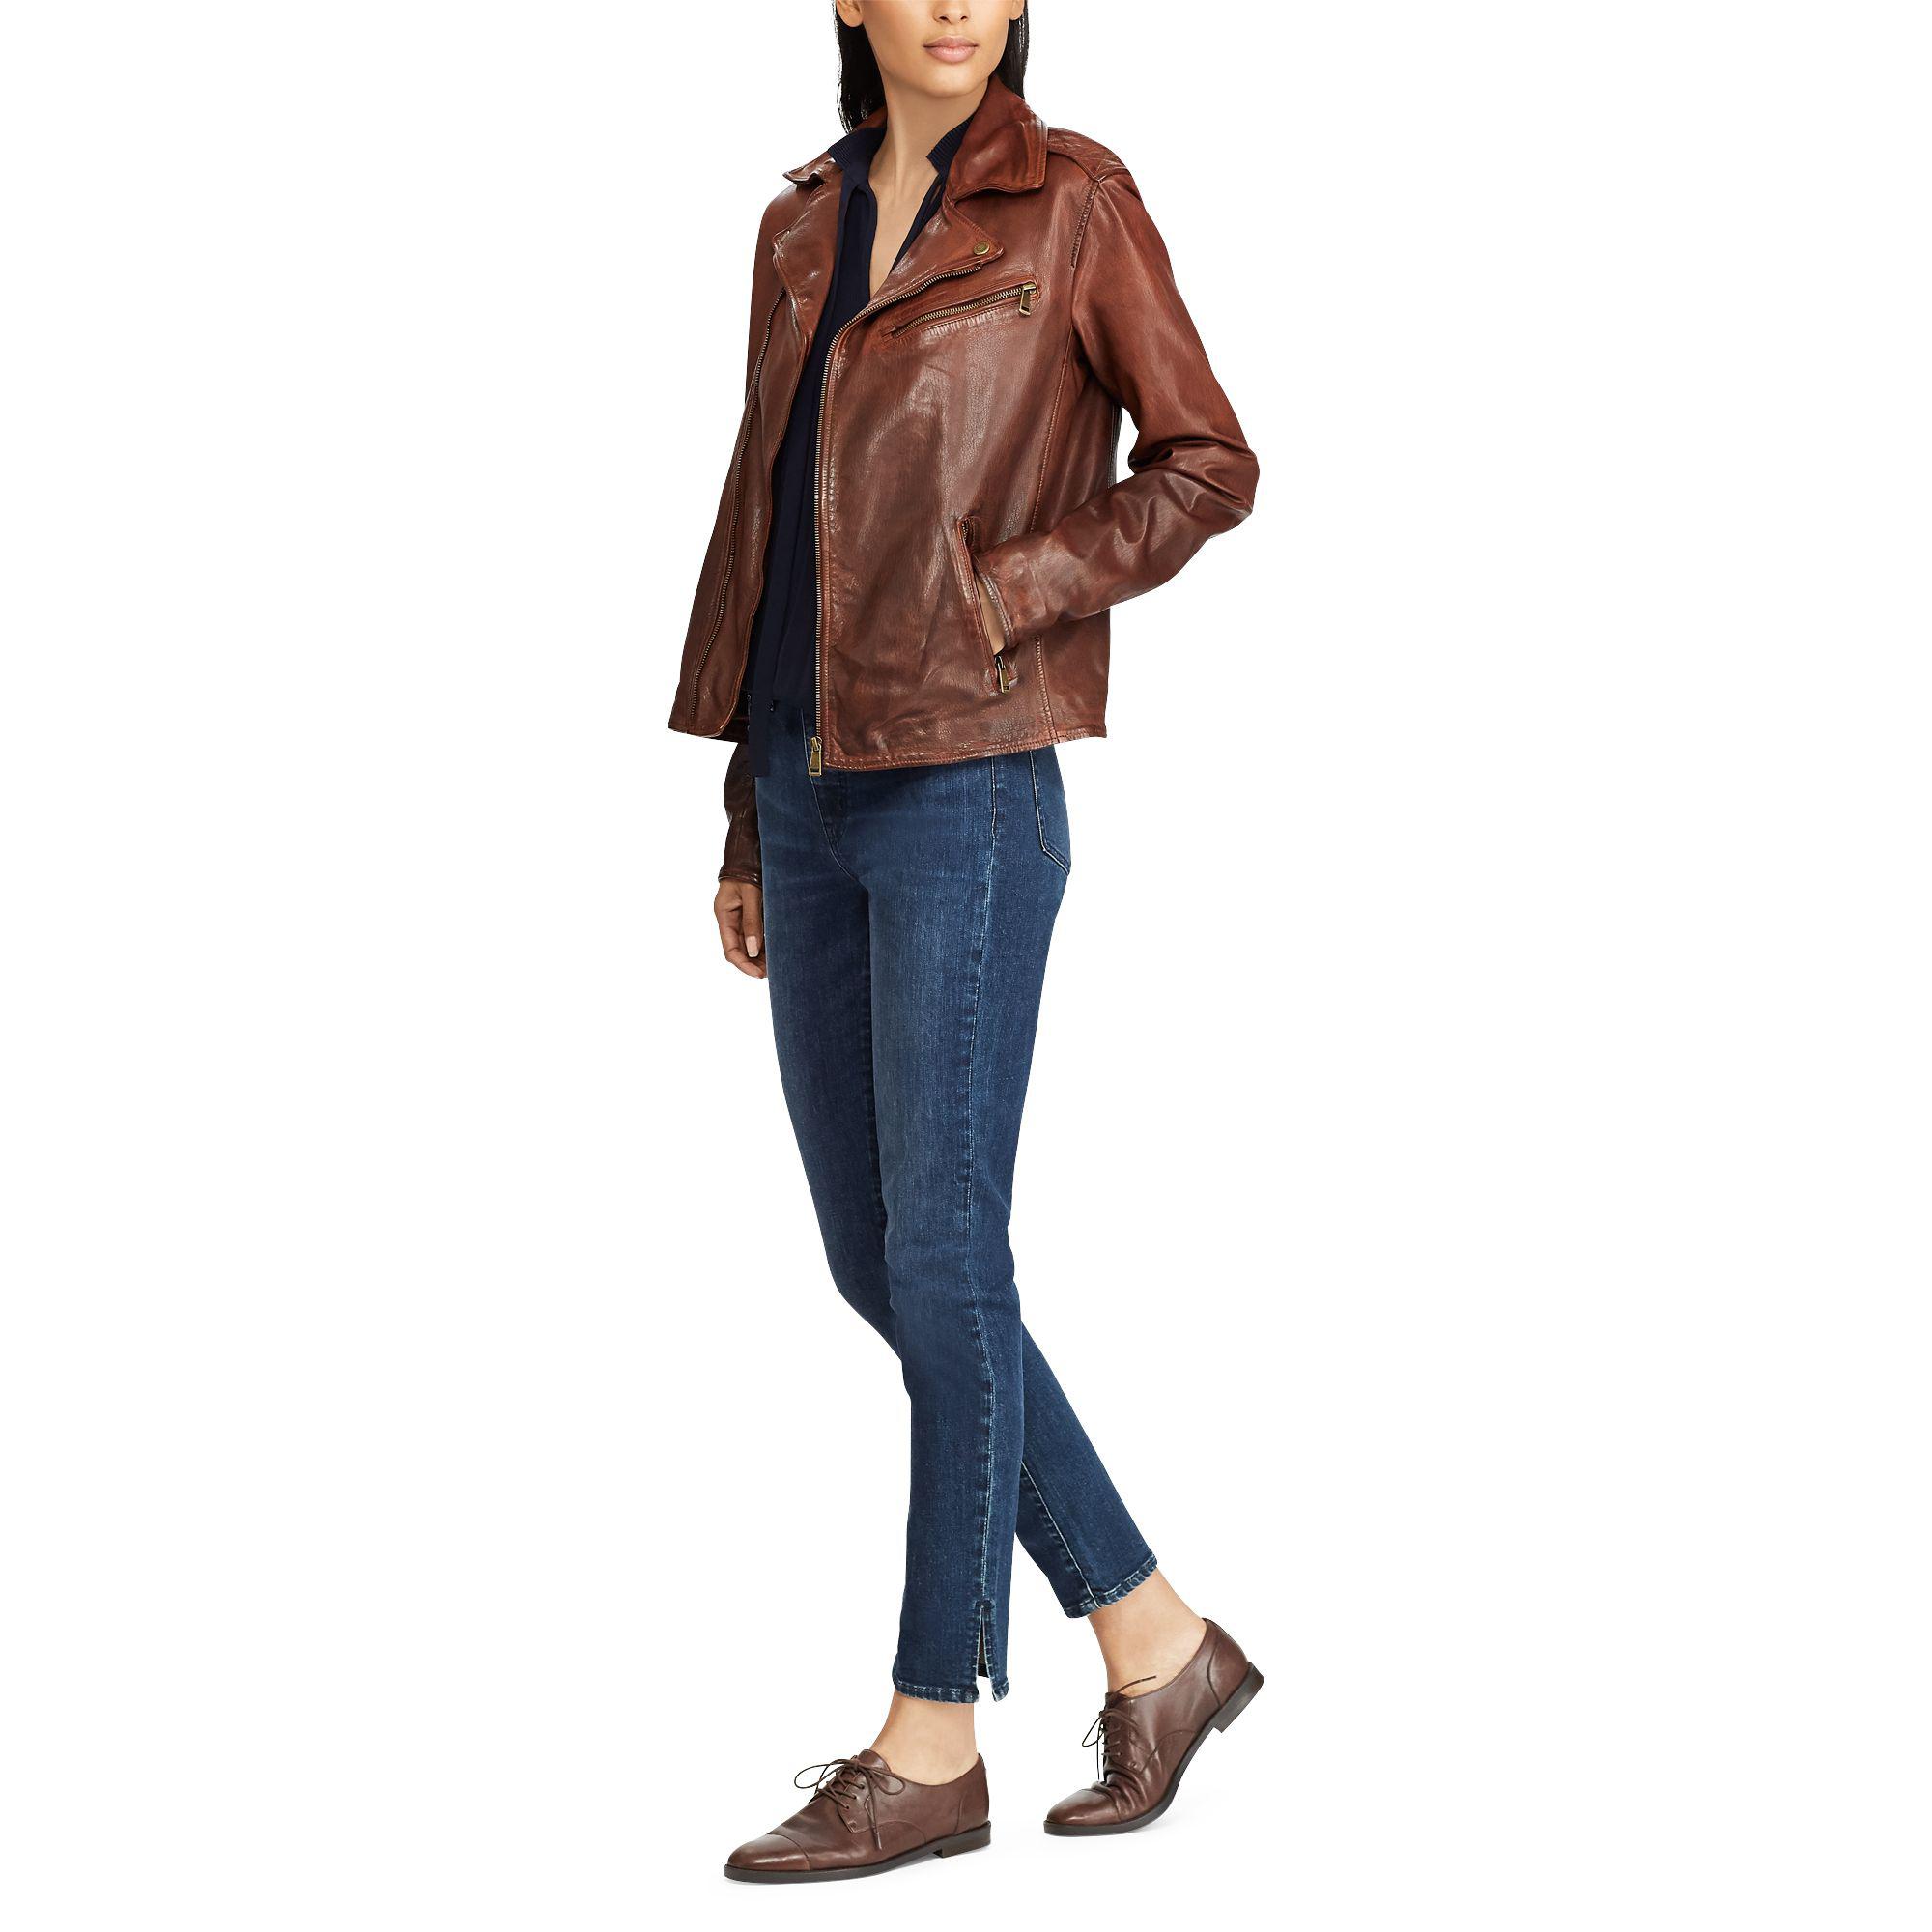 Ralph Lauren Tumbled Leather Jacket in Brown - Lyst